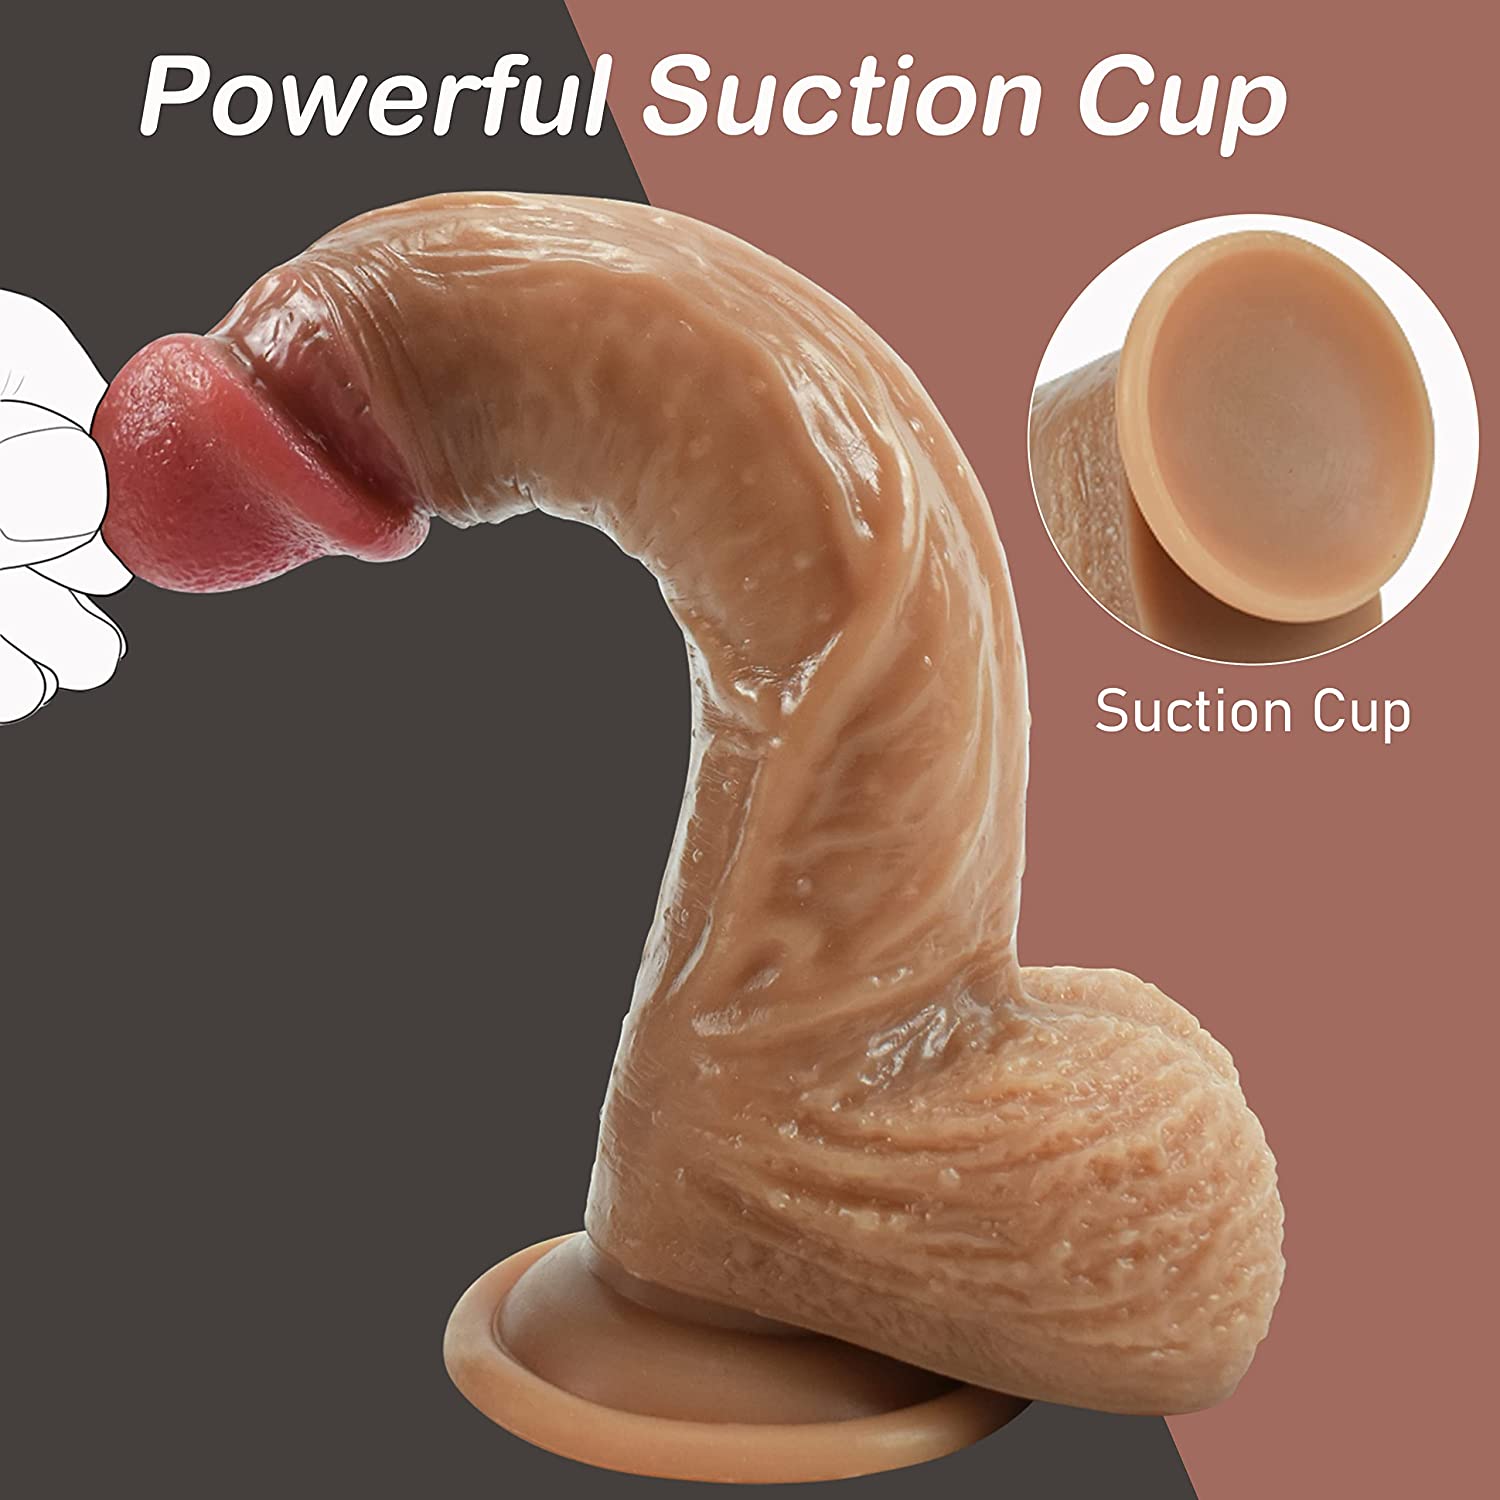 Laphwing Water Elf Realistic Squirting Dildo